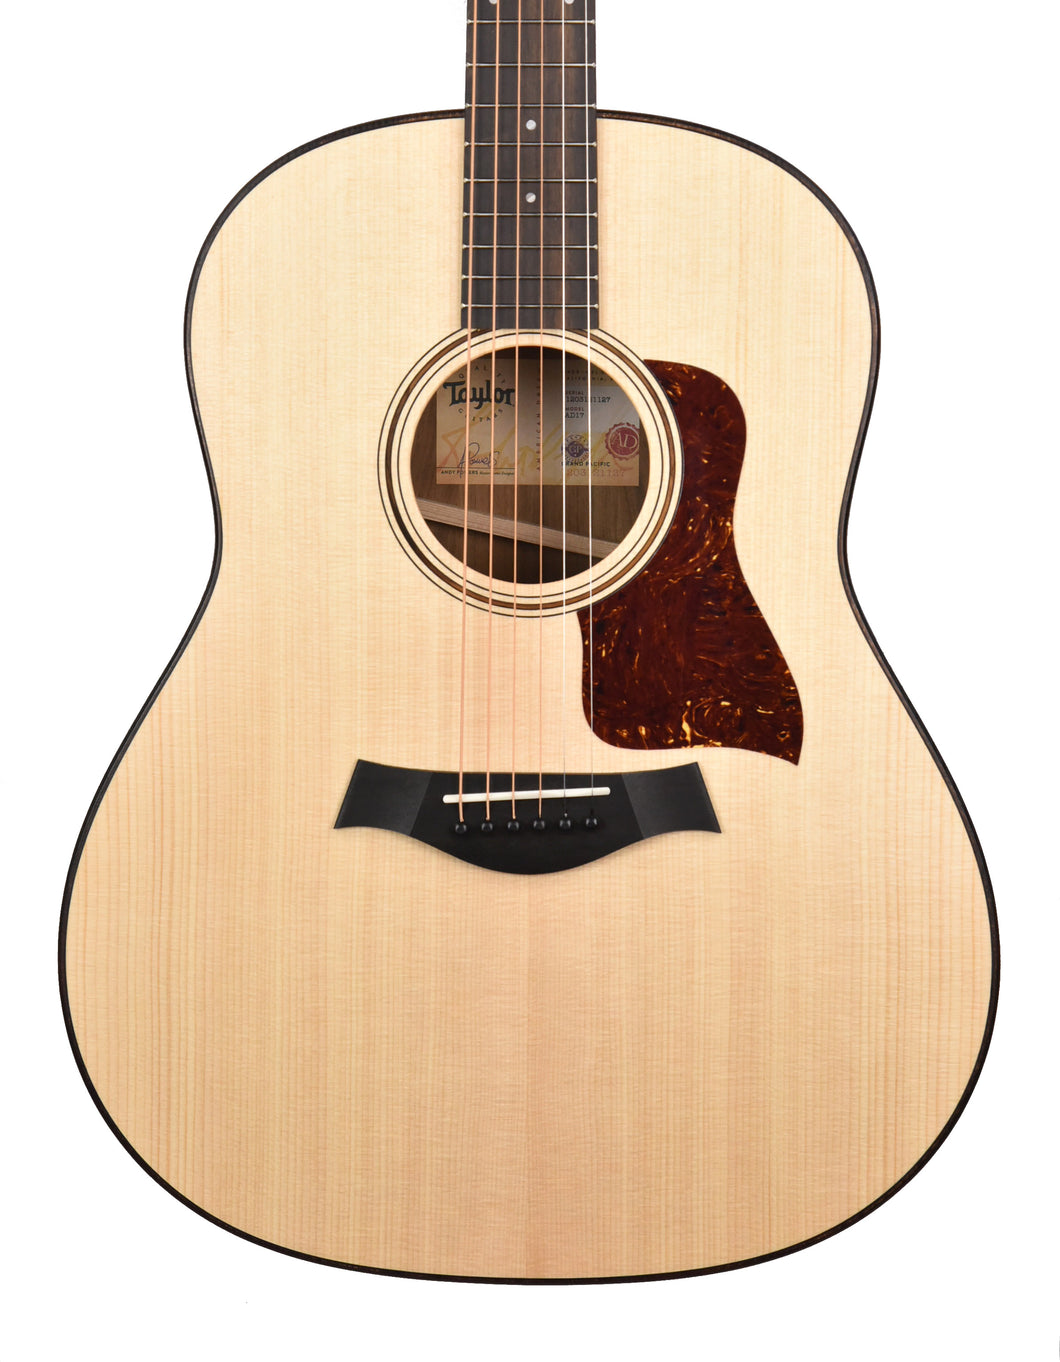 Taylor AD17 Grand Pacific Acoustic Guitar in Natural 1203121127 - The Music Gallery